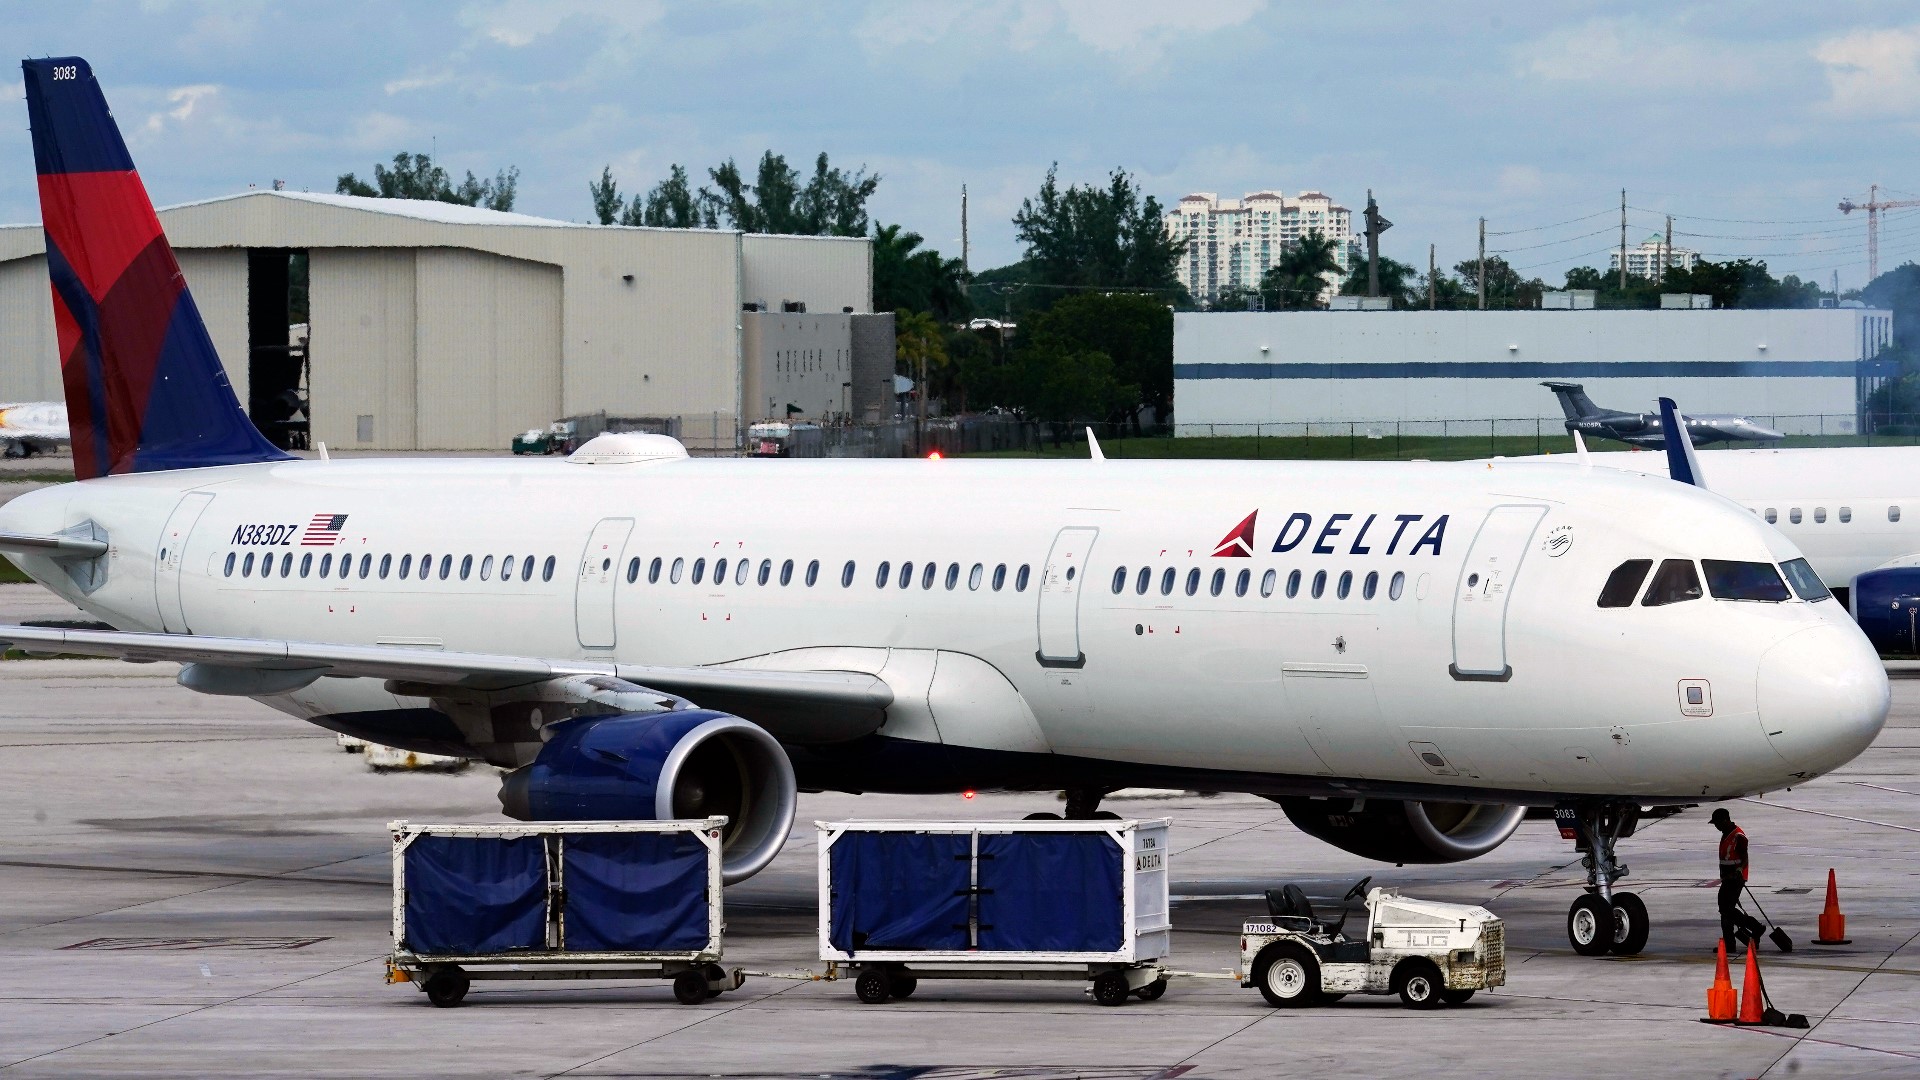 The class action lawsuit was originally brought in April 2020 by a passenger claiming Delta had breached its contract with flyers.